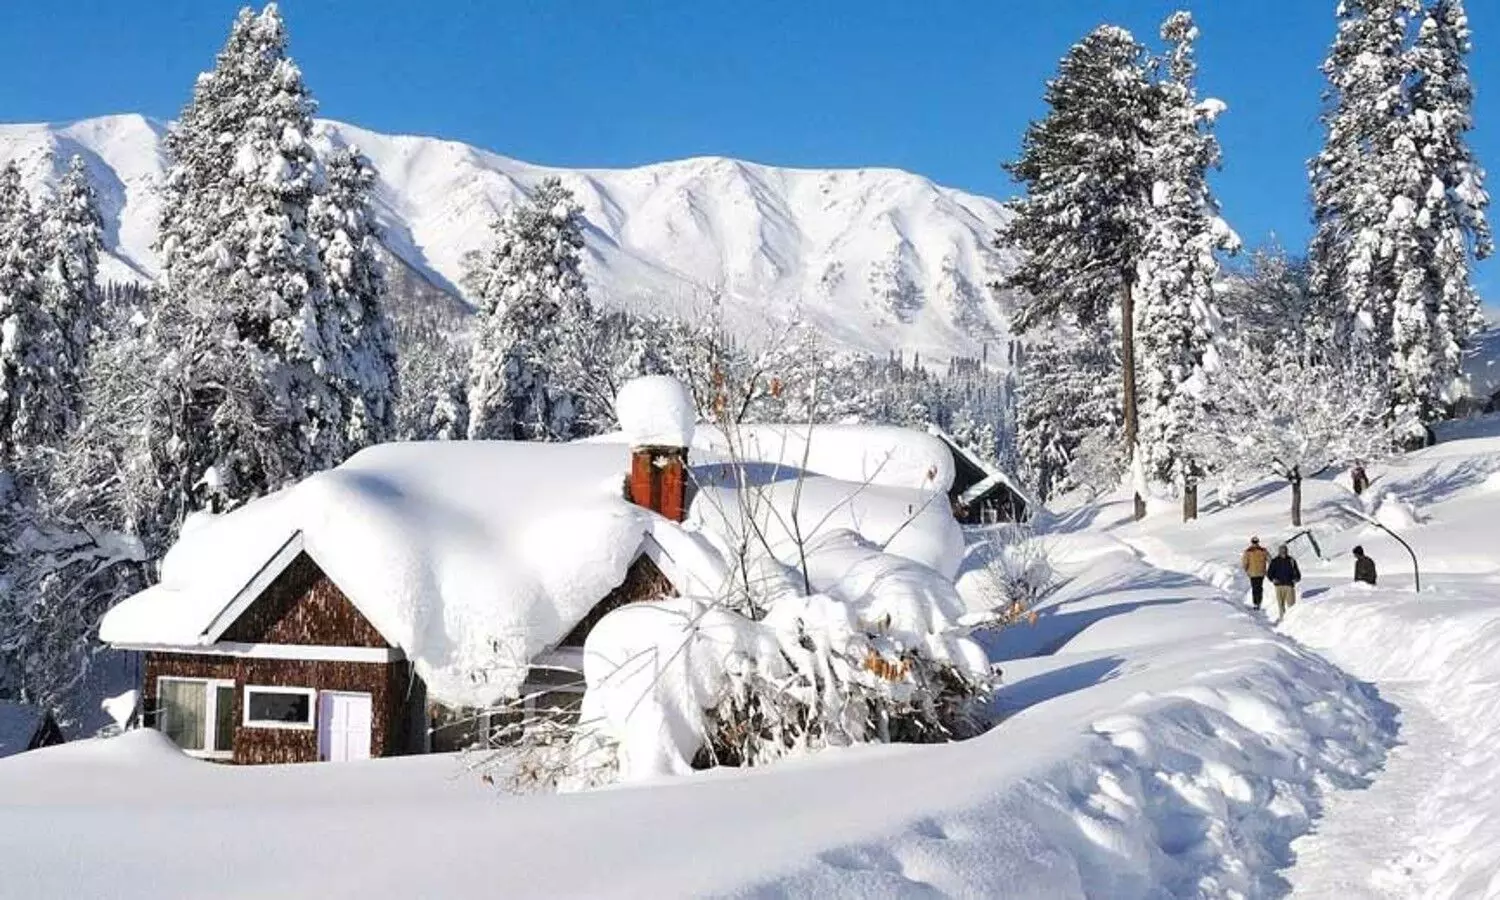 Kashmir Most Beautiful Place to Visit in Winter